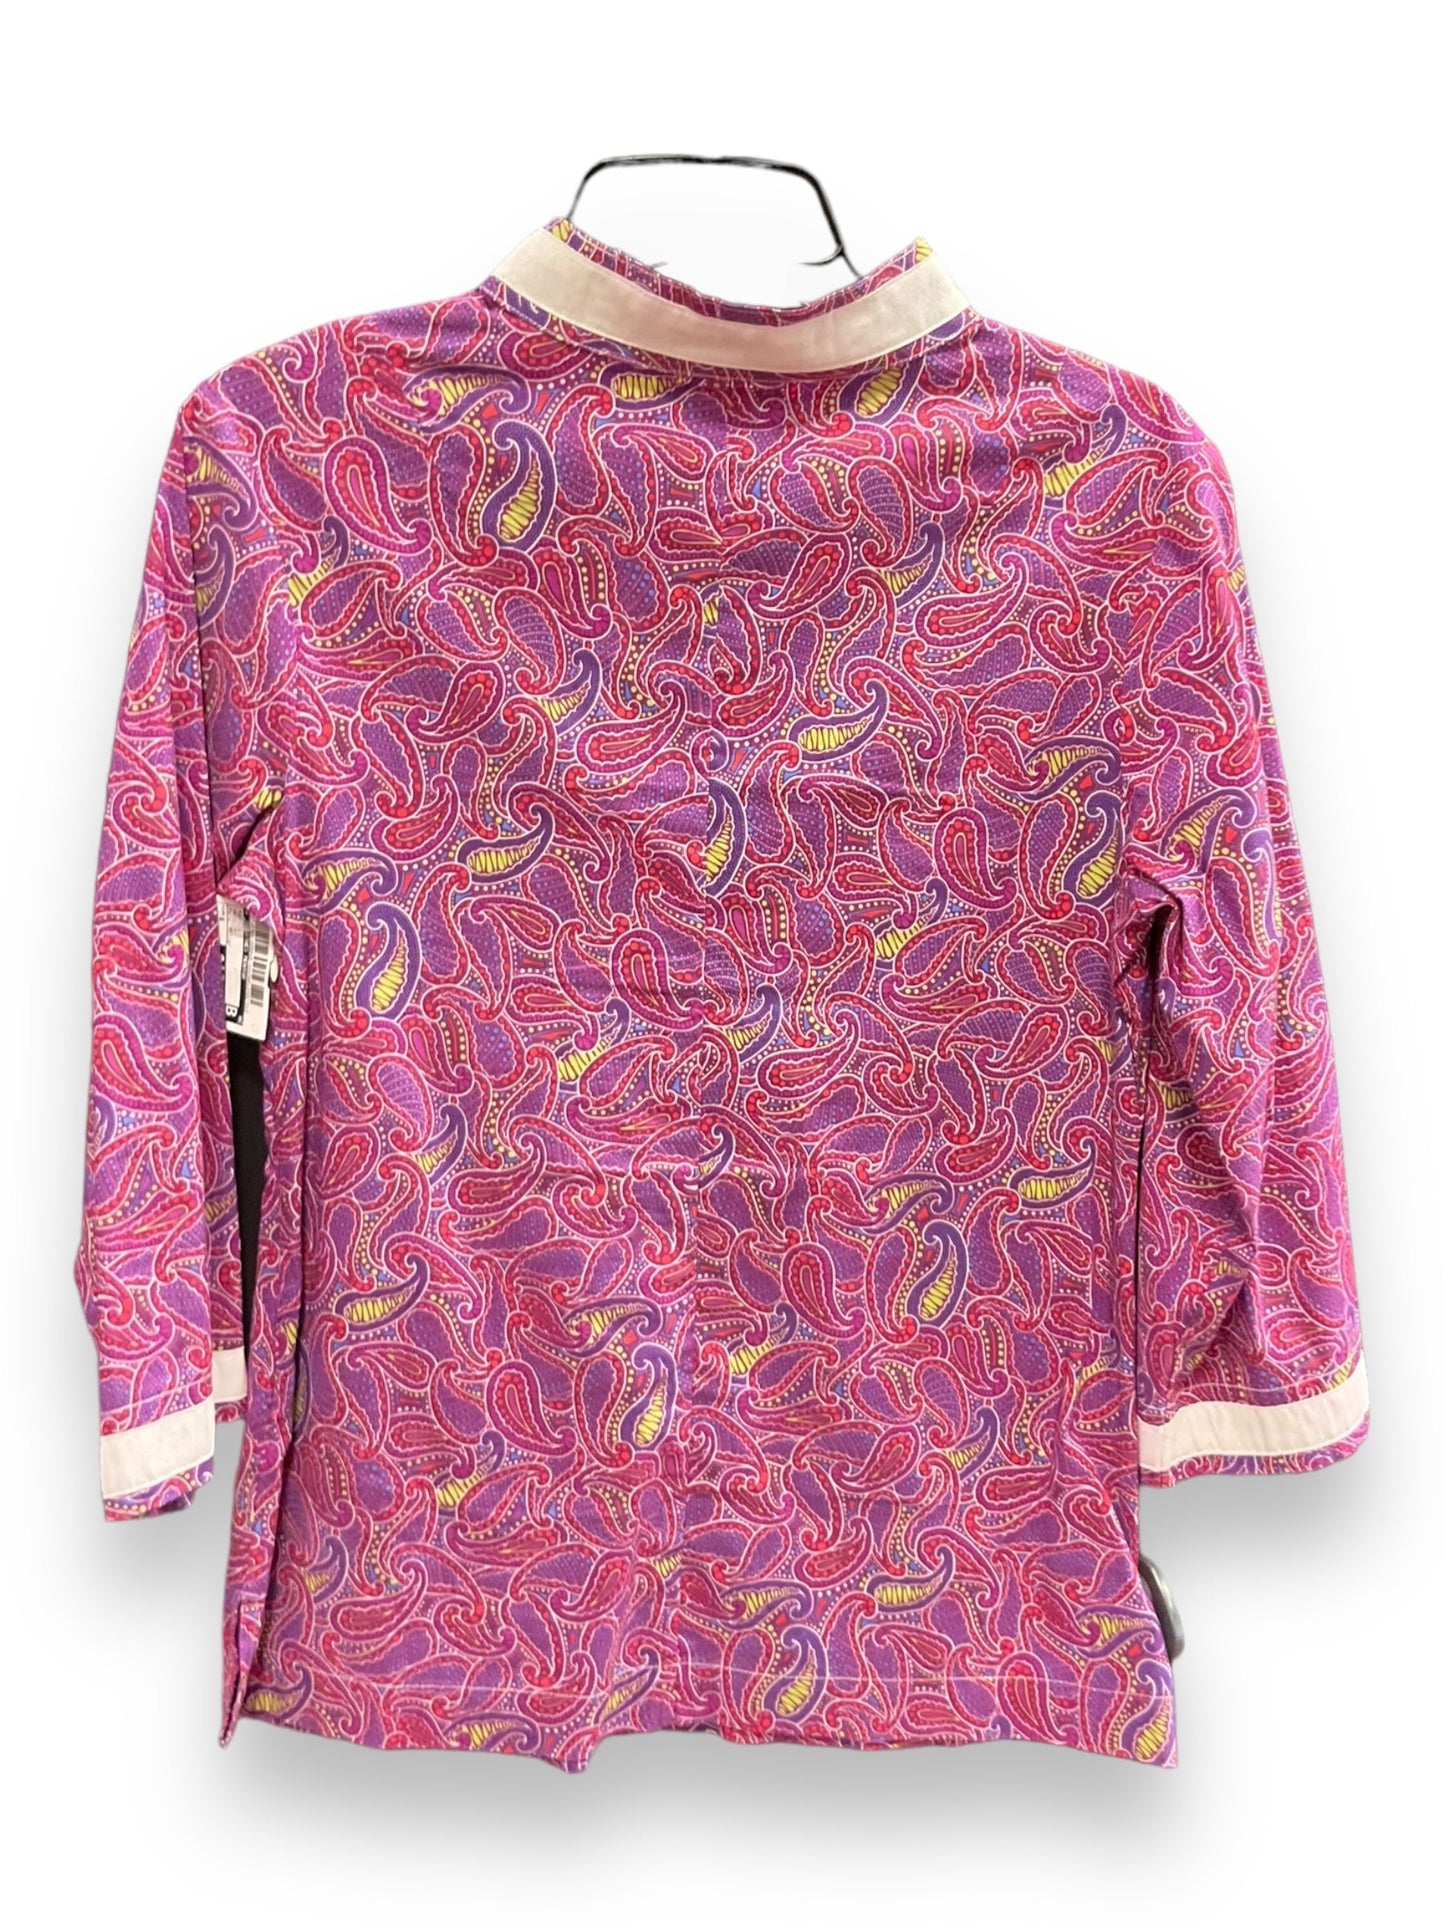 Paisley Top Long Sleeve Clothes Mentor, Size S